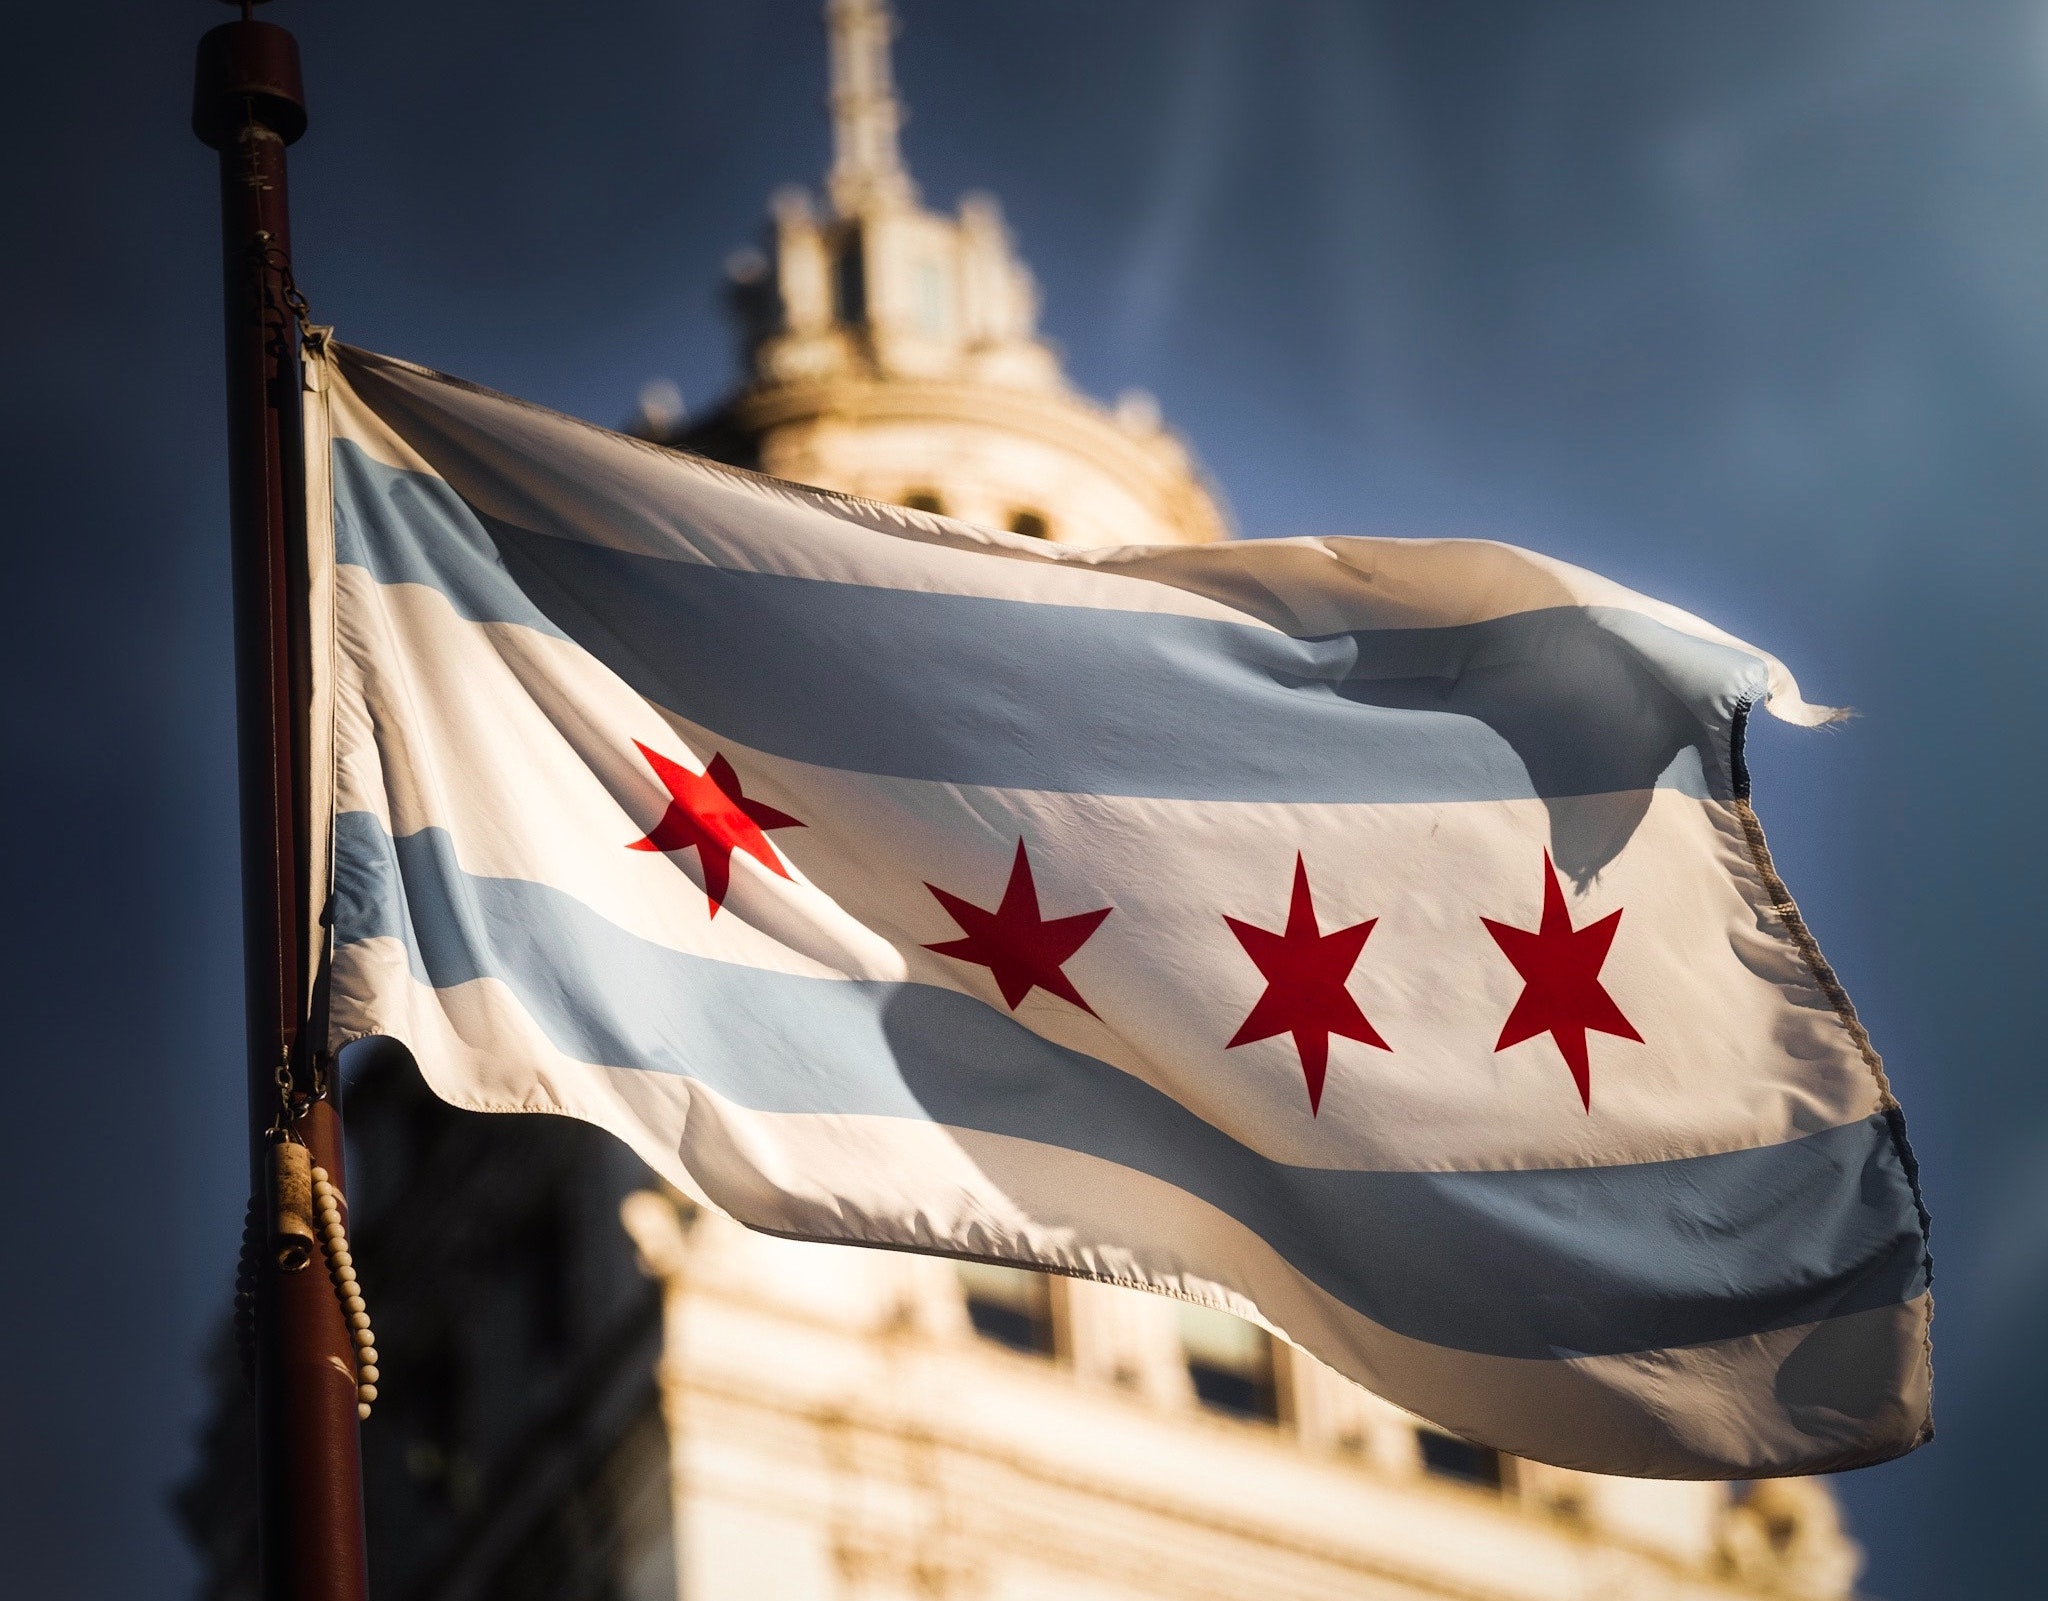 13 Chicago Startup Marketers Share How They Adapted to COVID-19